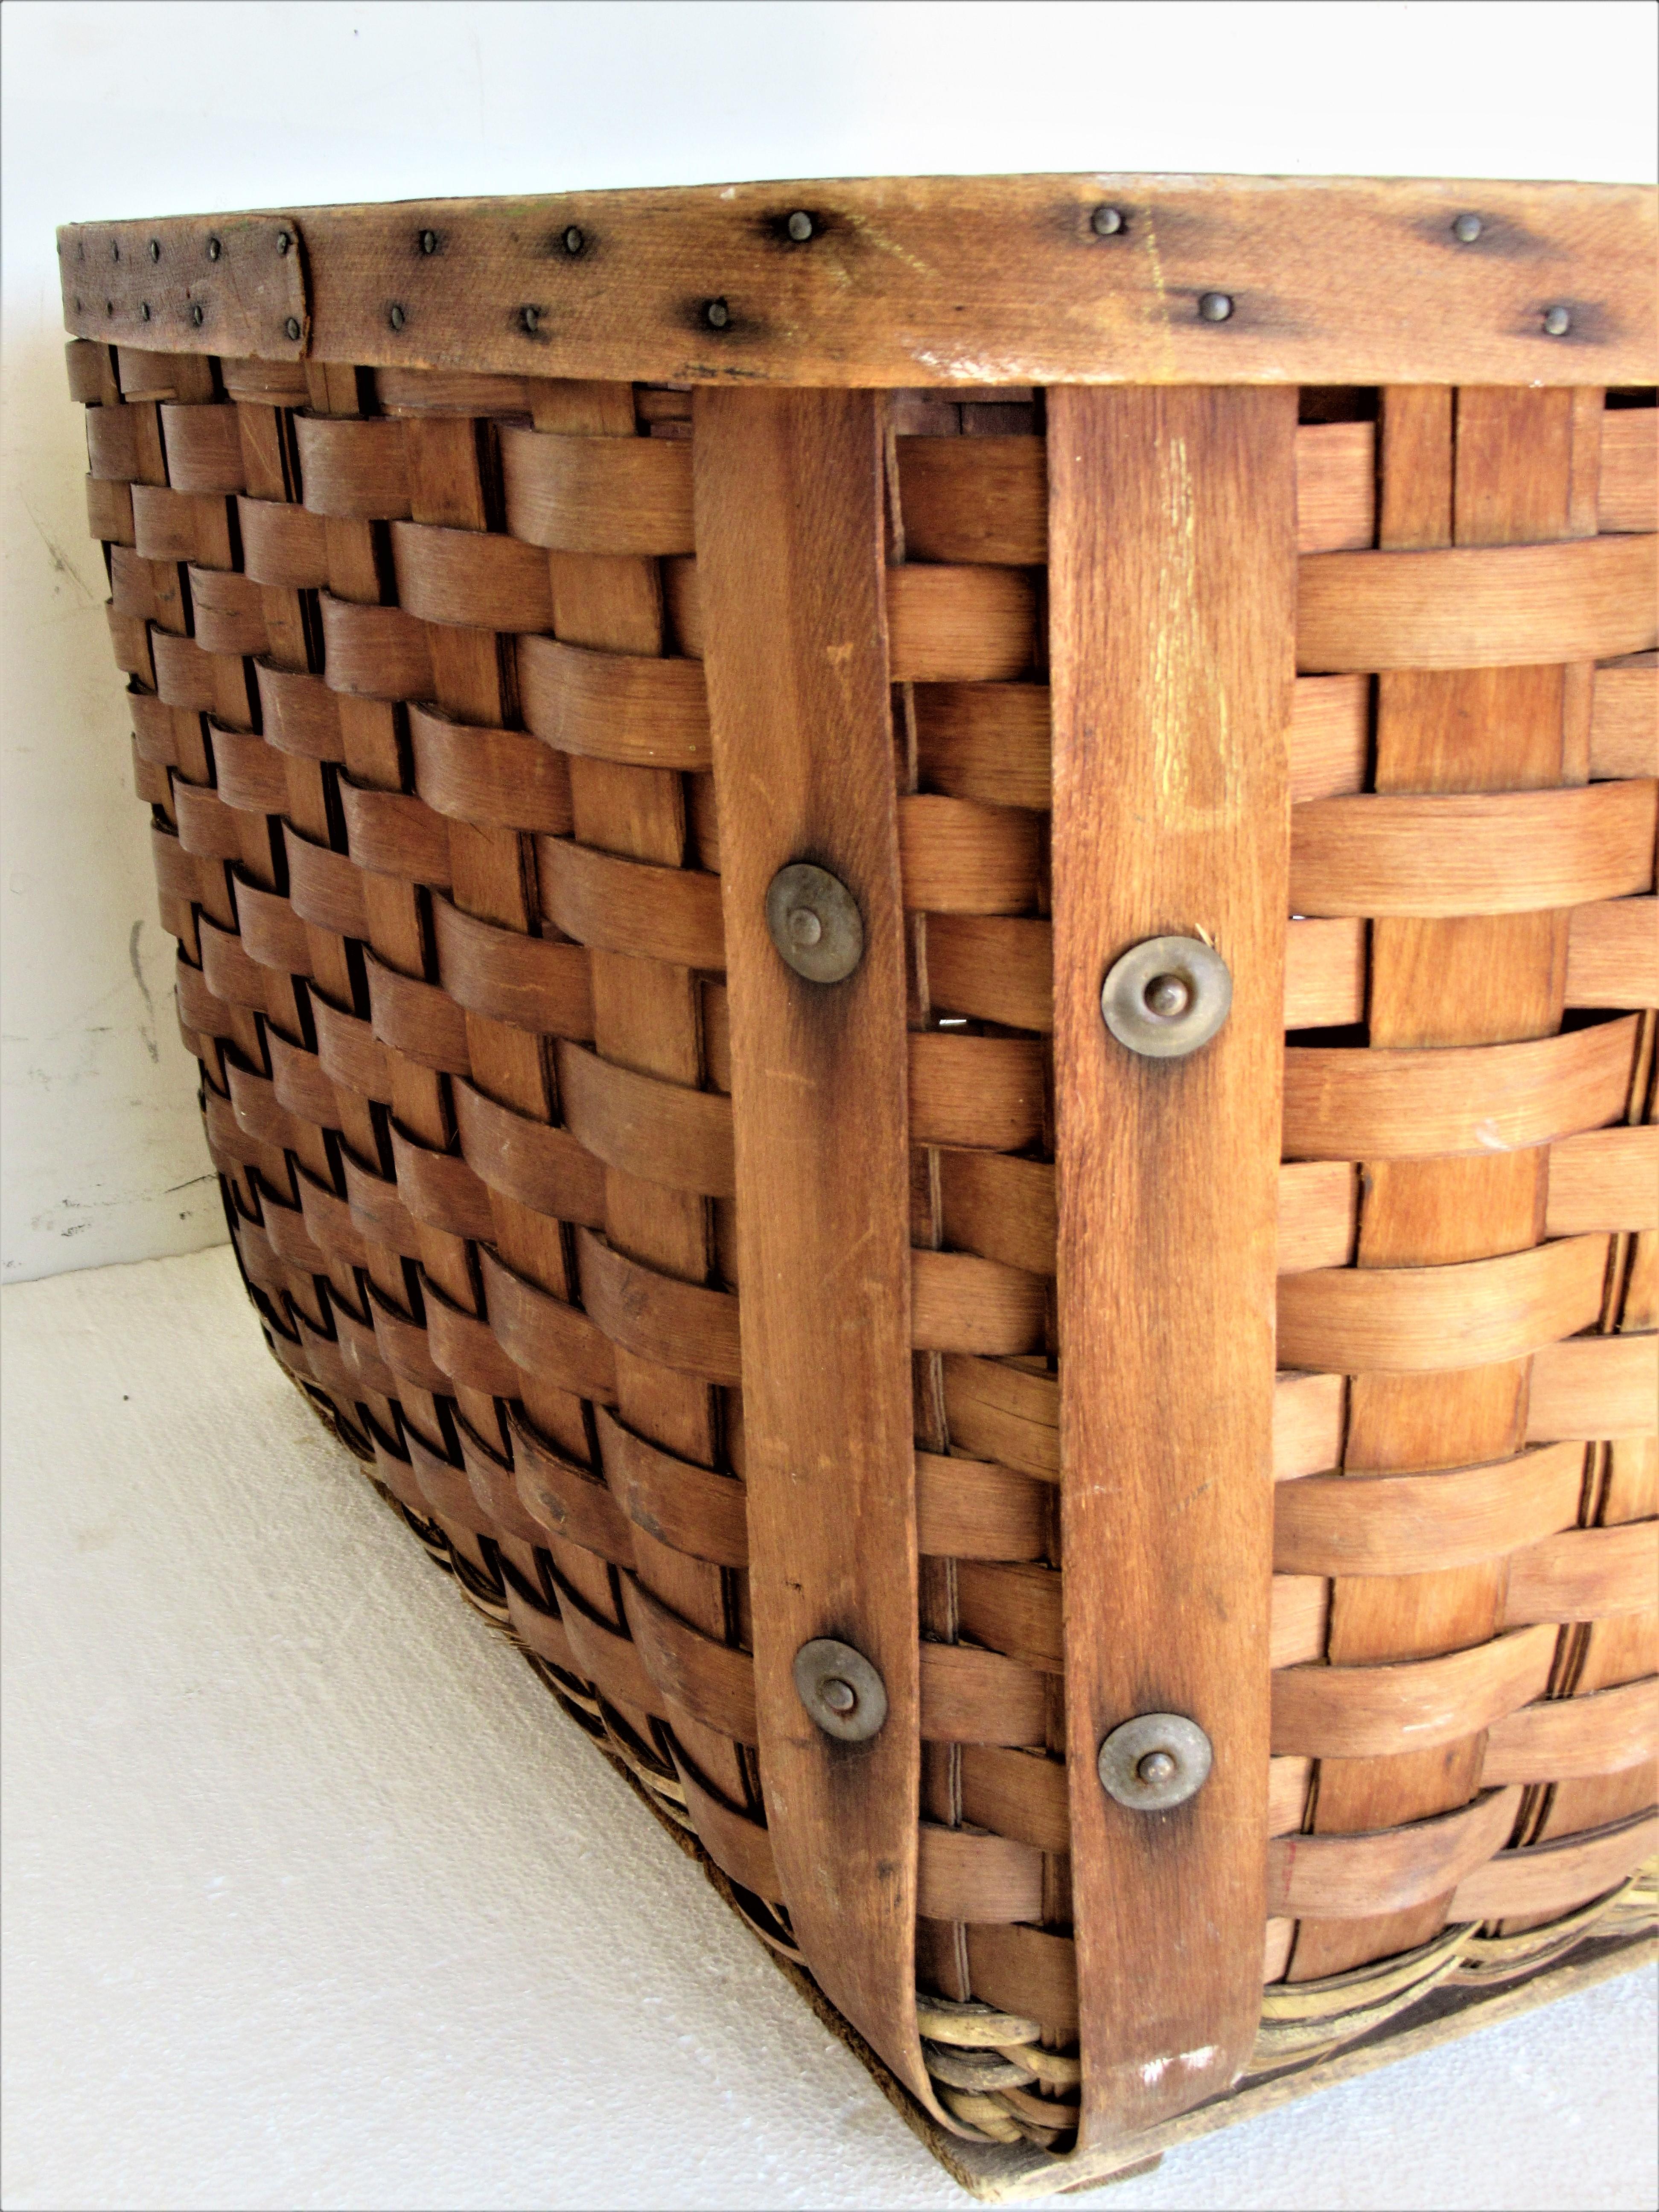 Antique hand crafted bent wood / splint and woven wicker large storage or gathering basket with two handles, tin metal buttons and wood planked bottom. A very good quality structurally solid fully functional decorative basket in overall beautifully